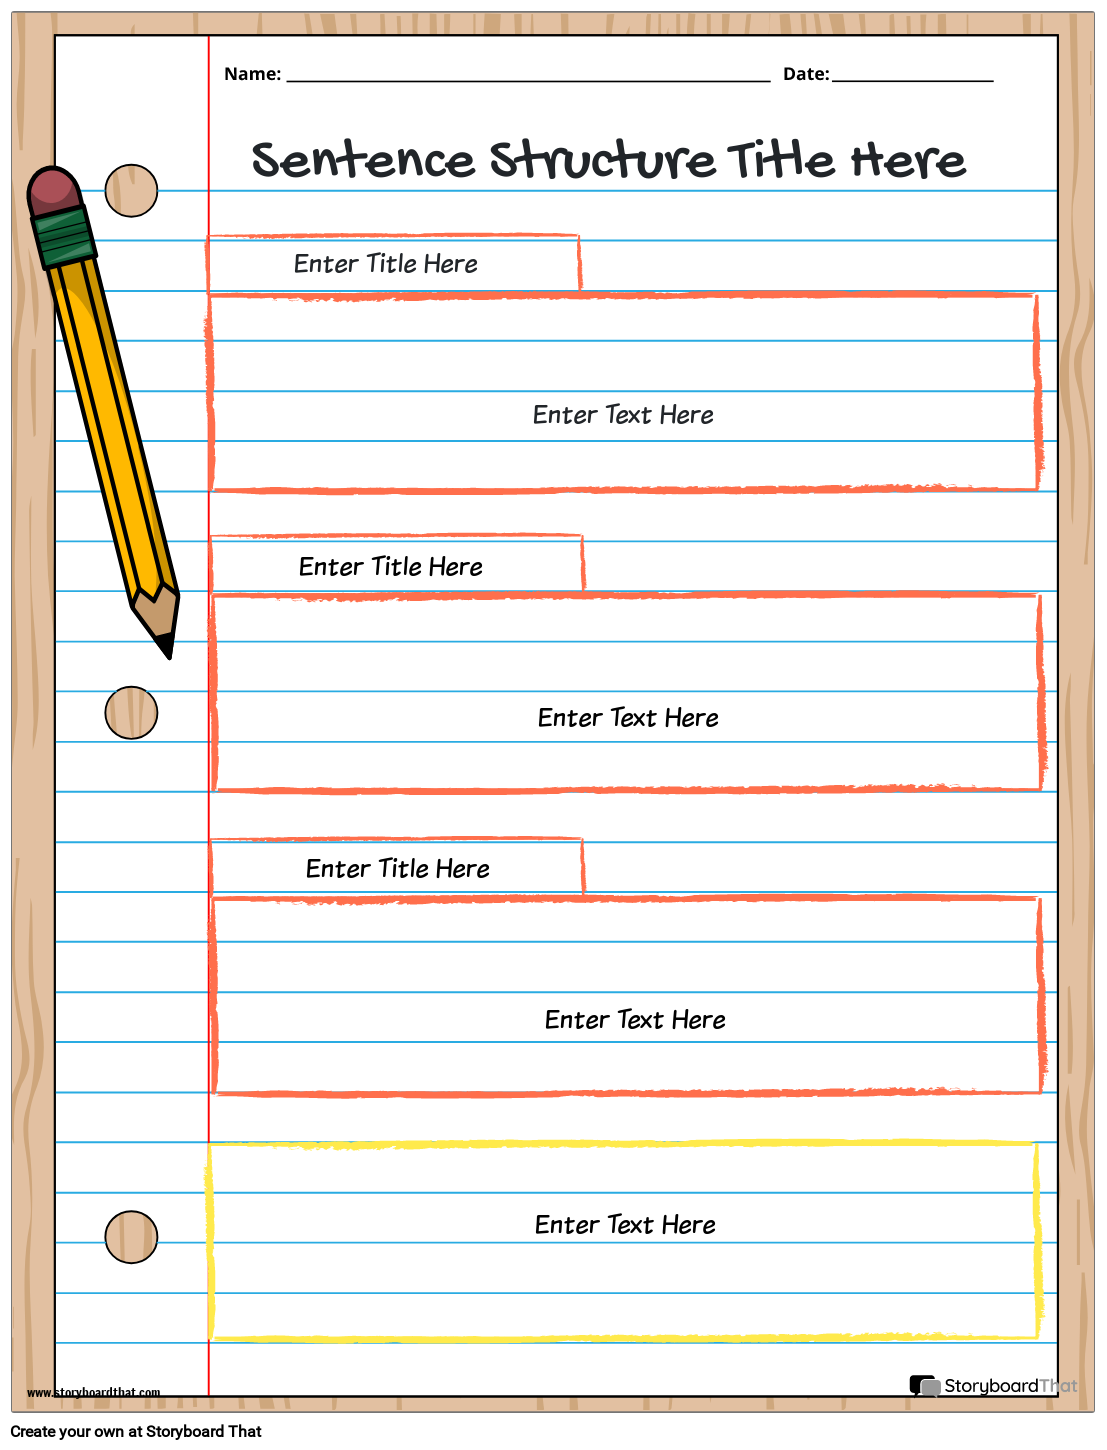 free-sentence-structure-worksheets-storyboardthat